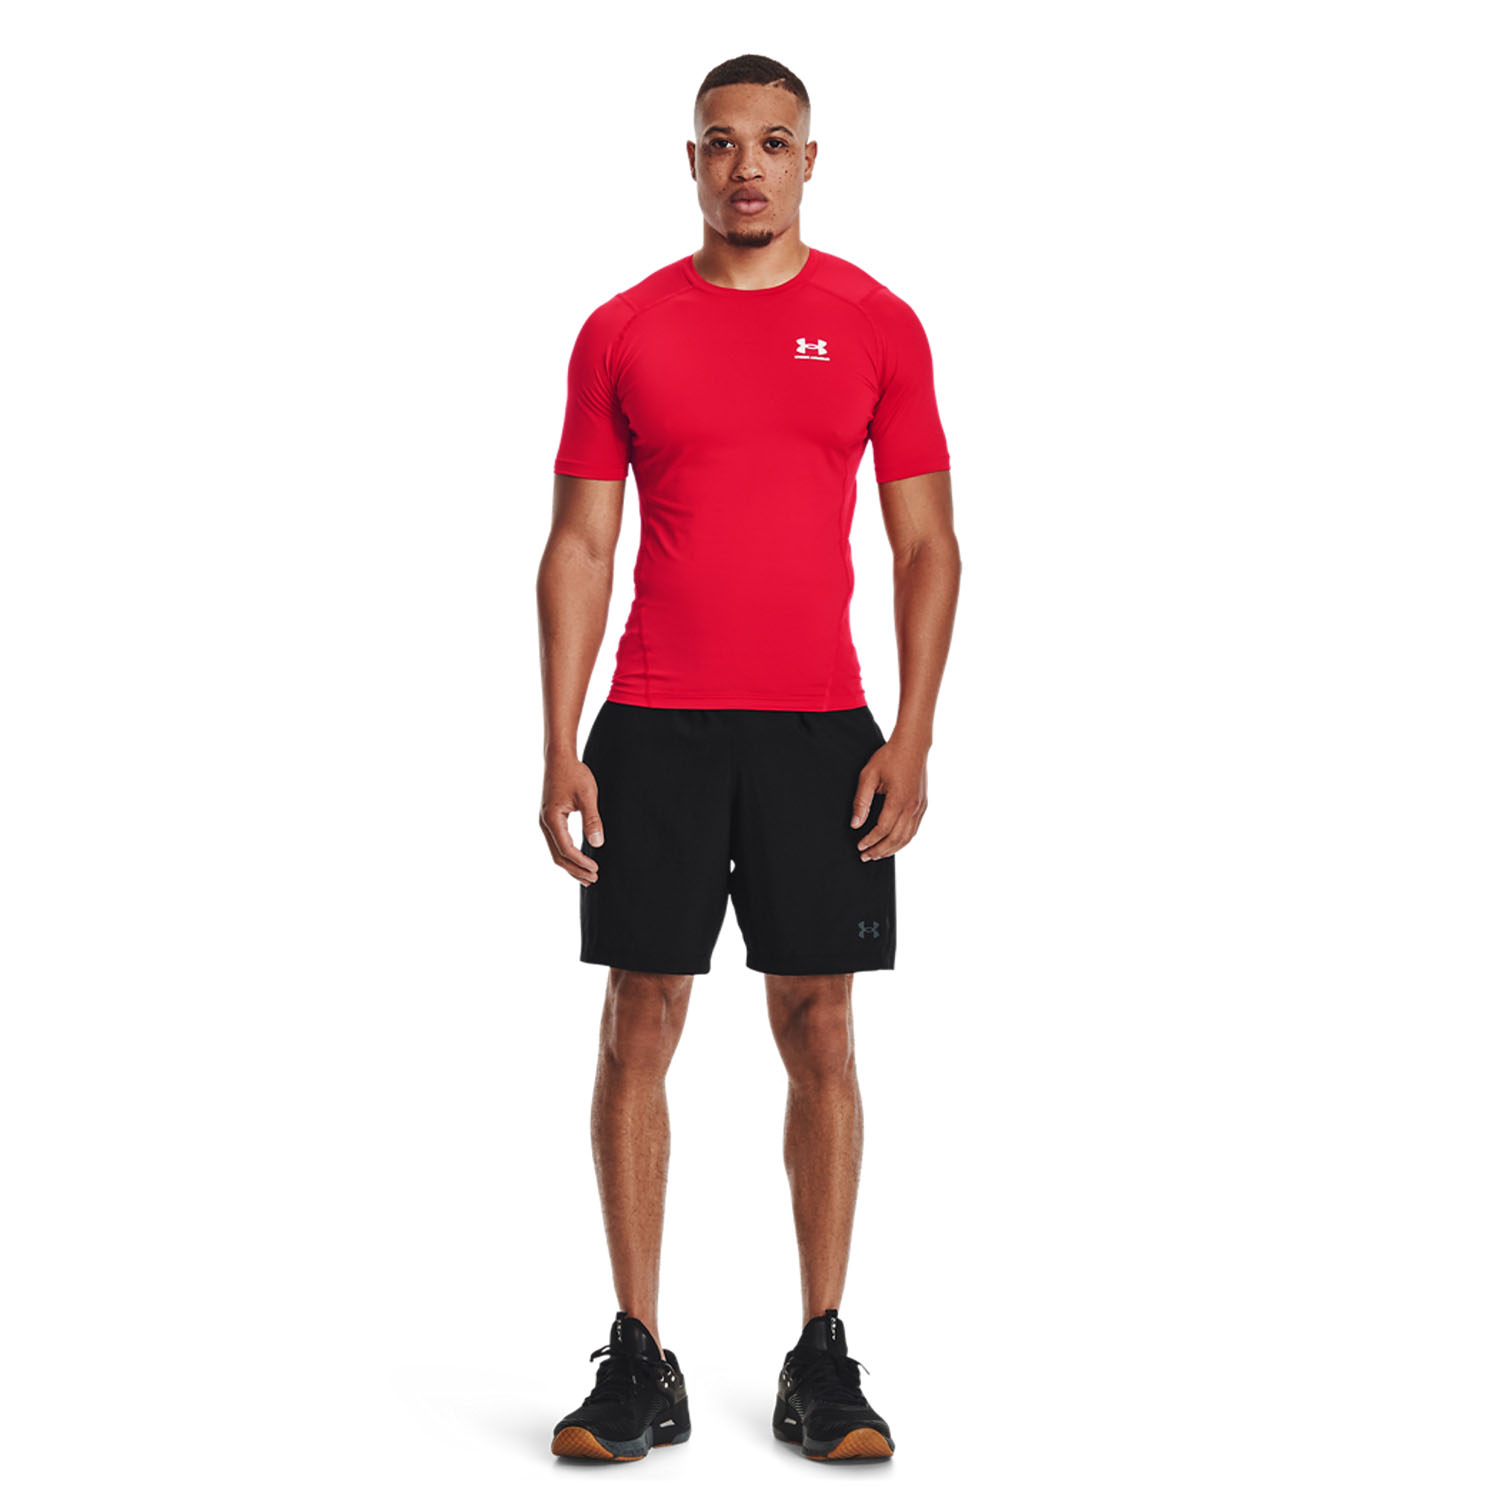 Under Armour HeatGear Compression T-Shirt - Red/White